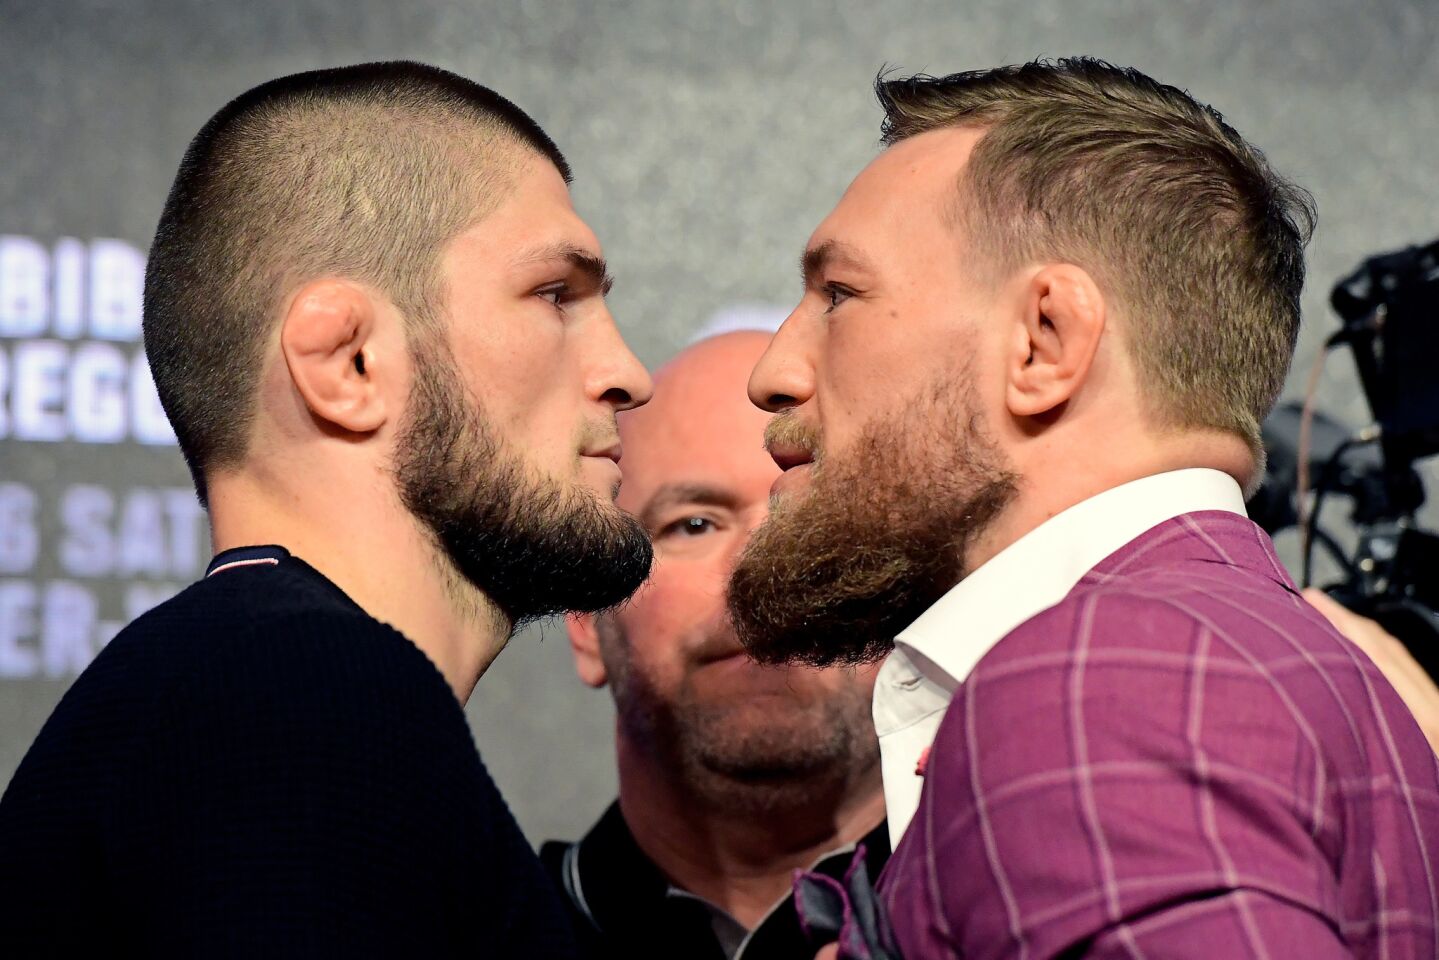 NEW YORK, NY - SEPTEMBER 20: Lightweight champion Khabib Nurmagomedov faces-off with Conor McGregor during the UFC 229 Press Conference at Radio City Music Hall on September 20, 2018 in New York City. (Photo by Steven Ryan/Getty Images) ** OUTS - ELSENT, FPG, CM - OUTS * NM, PH, VA if sourced by CT, LA or MoD **